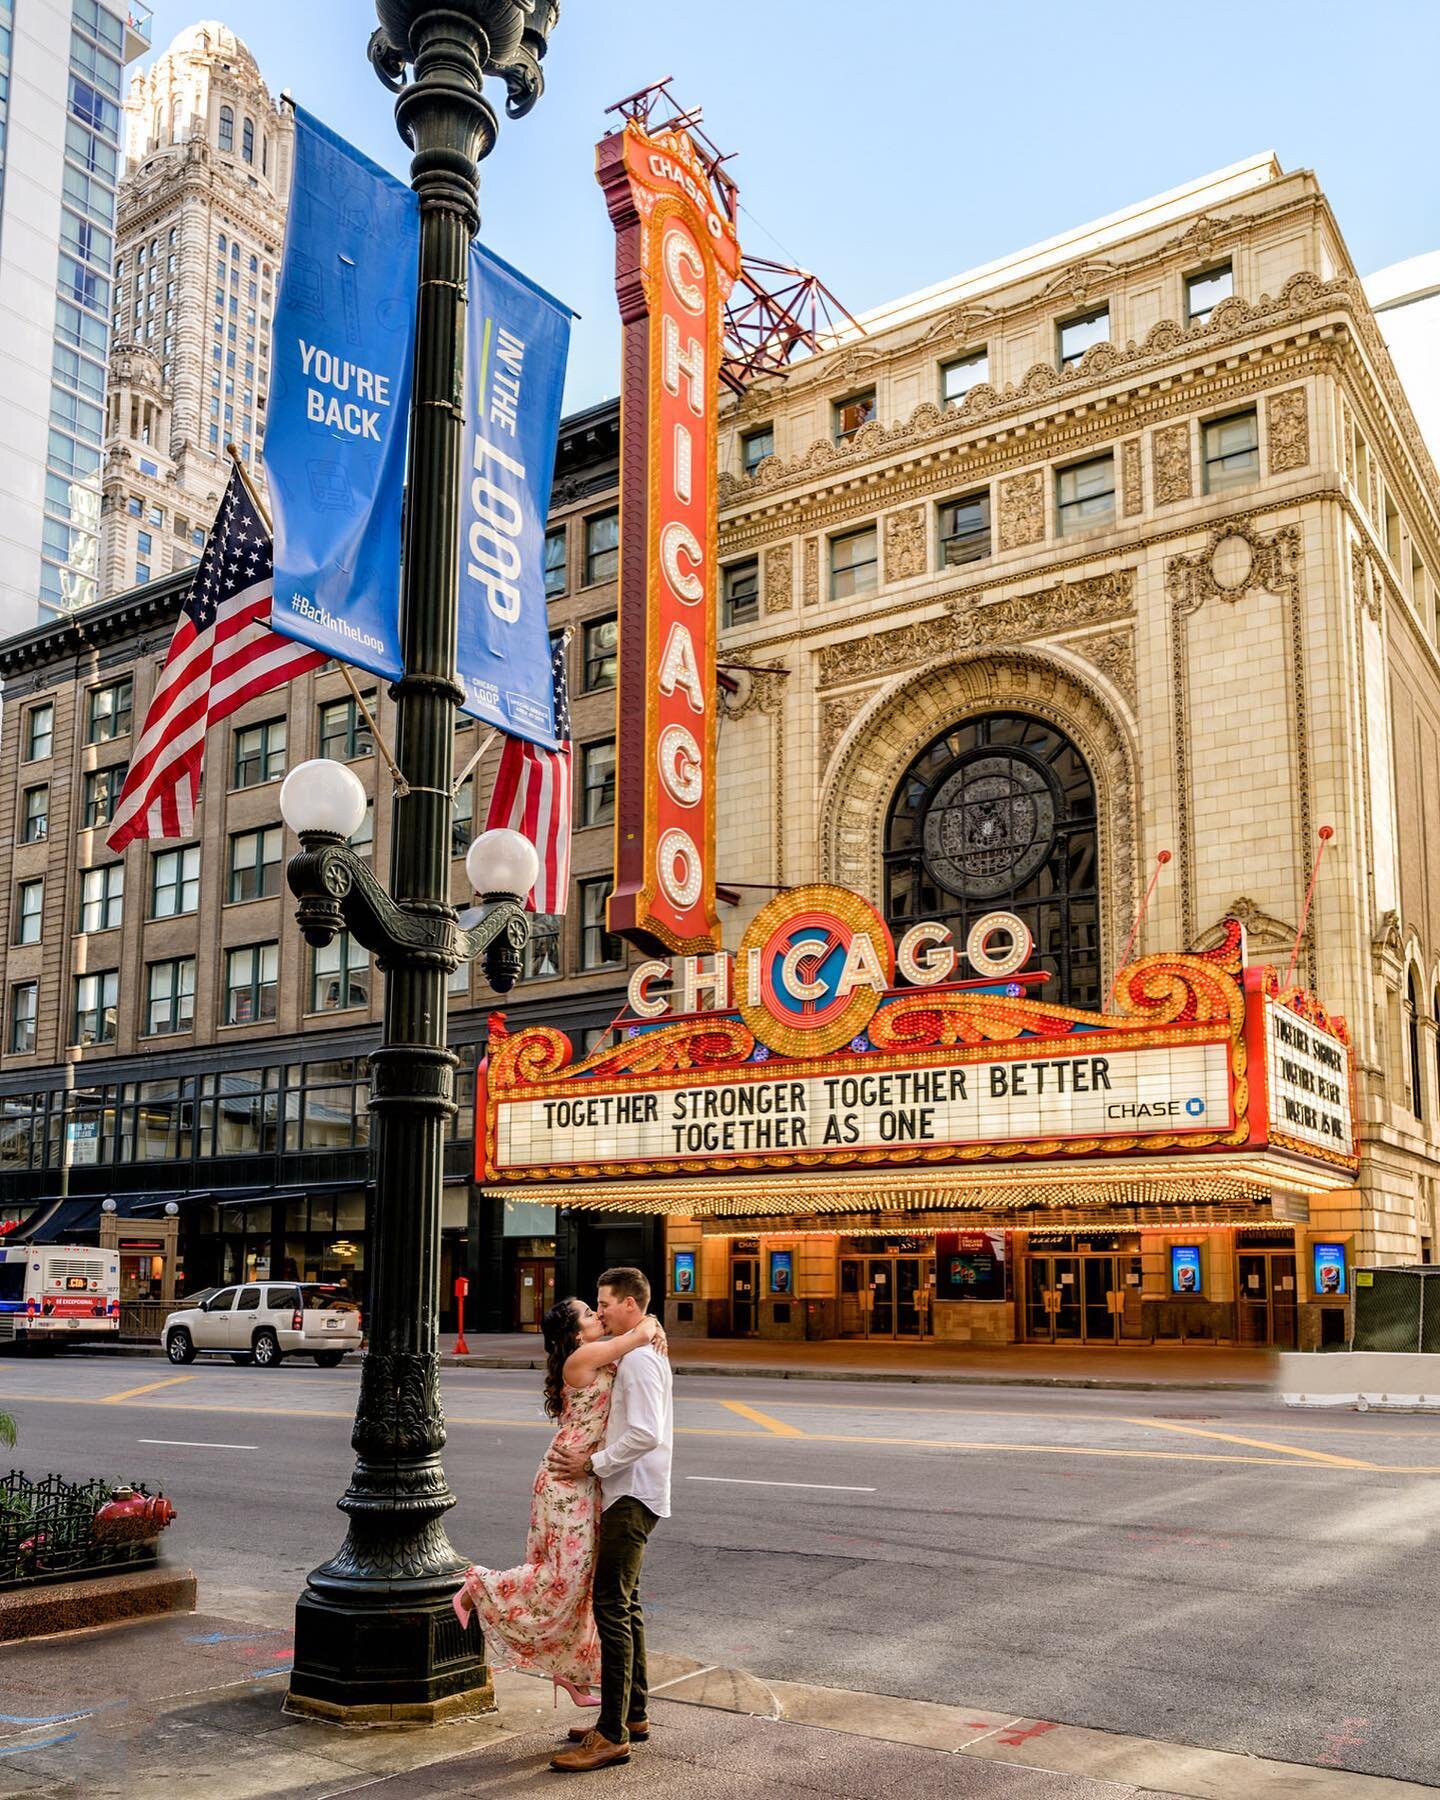 Together Stronger, Together Better, Together As One. Thanks @chicagotheatre , it&rsquo;s as though you knew we were coming!